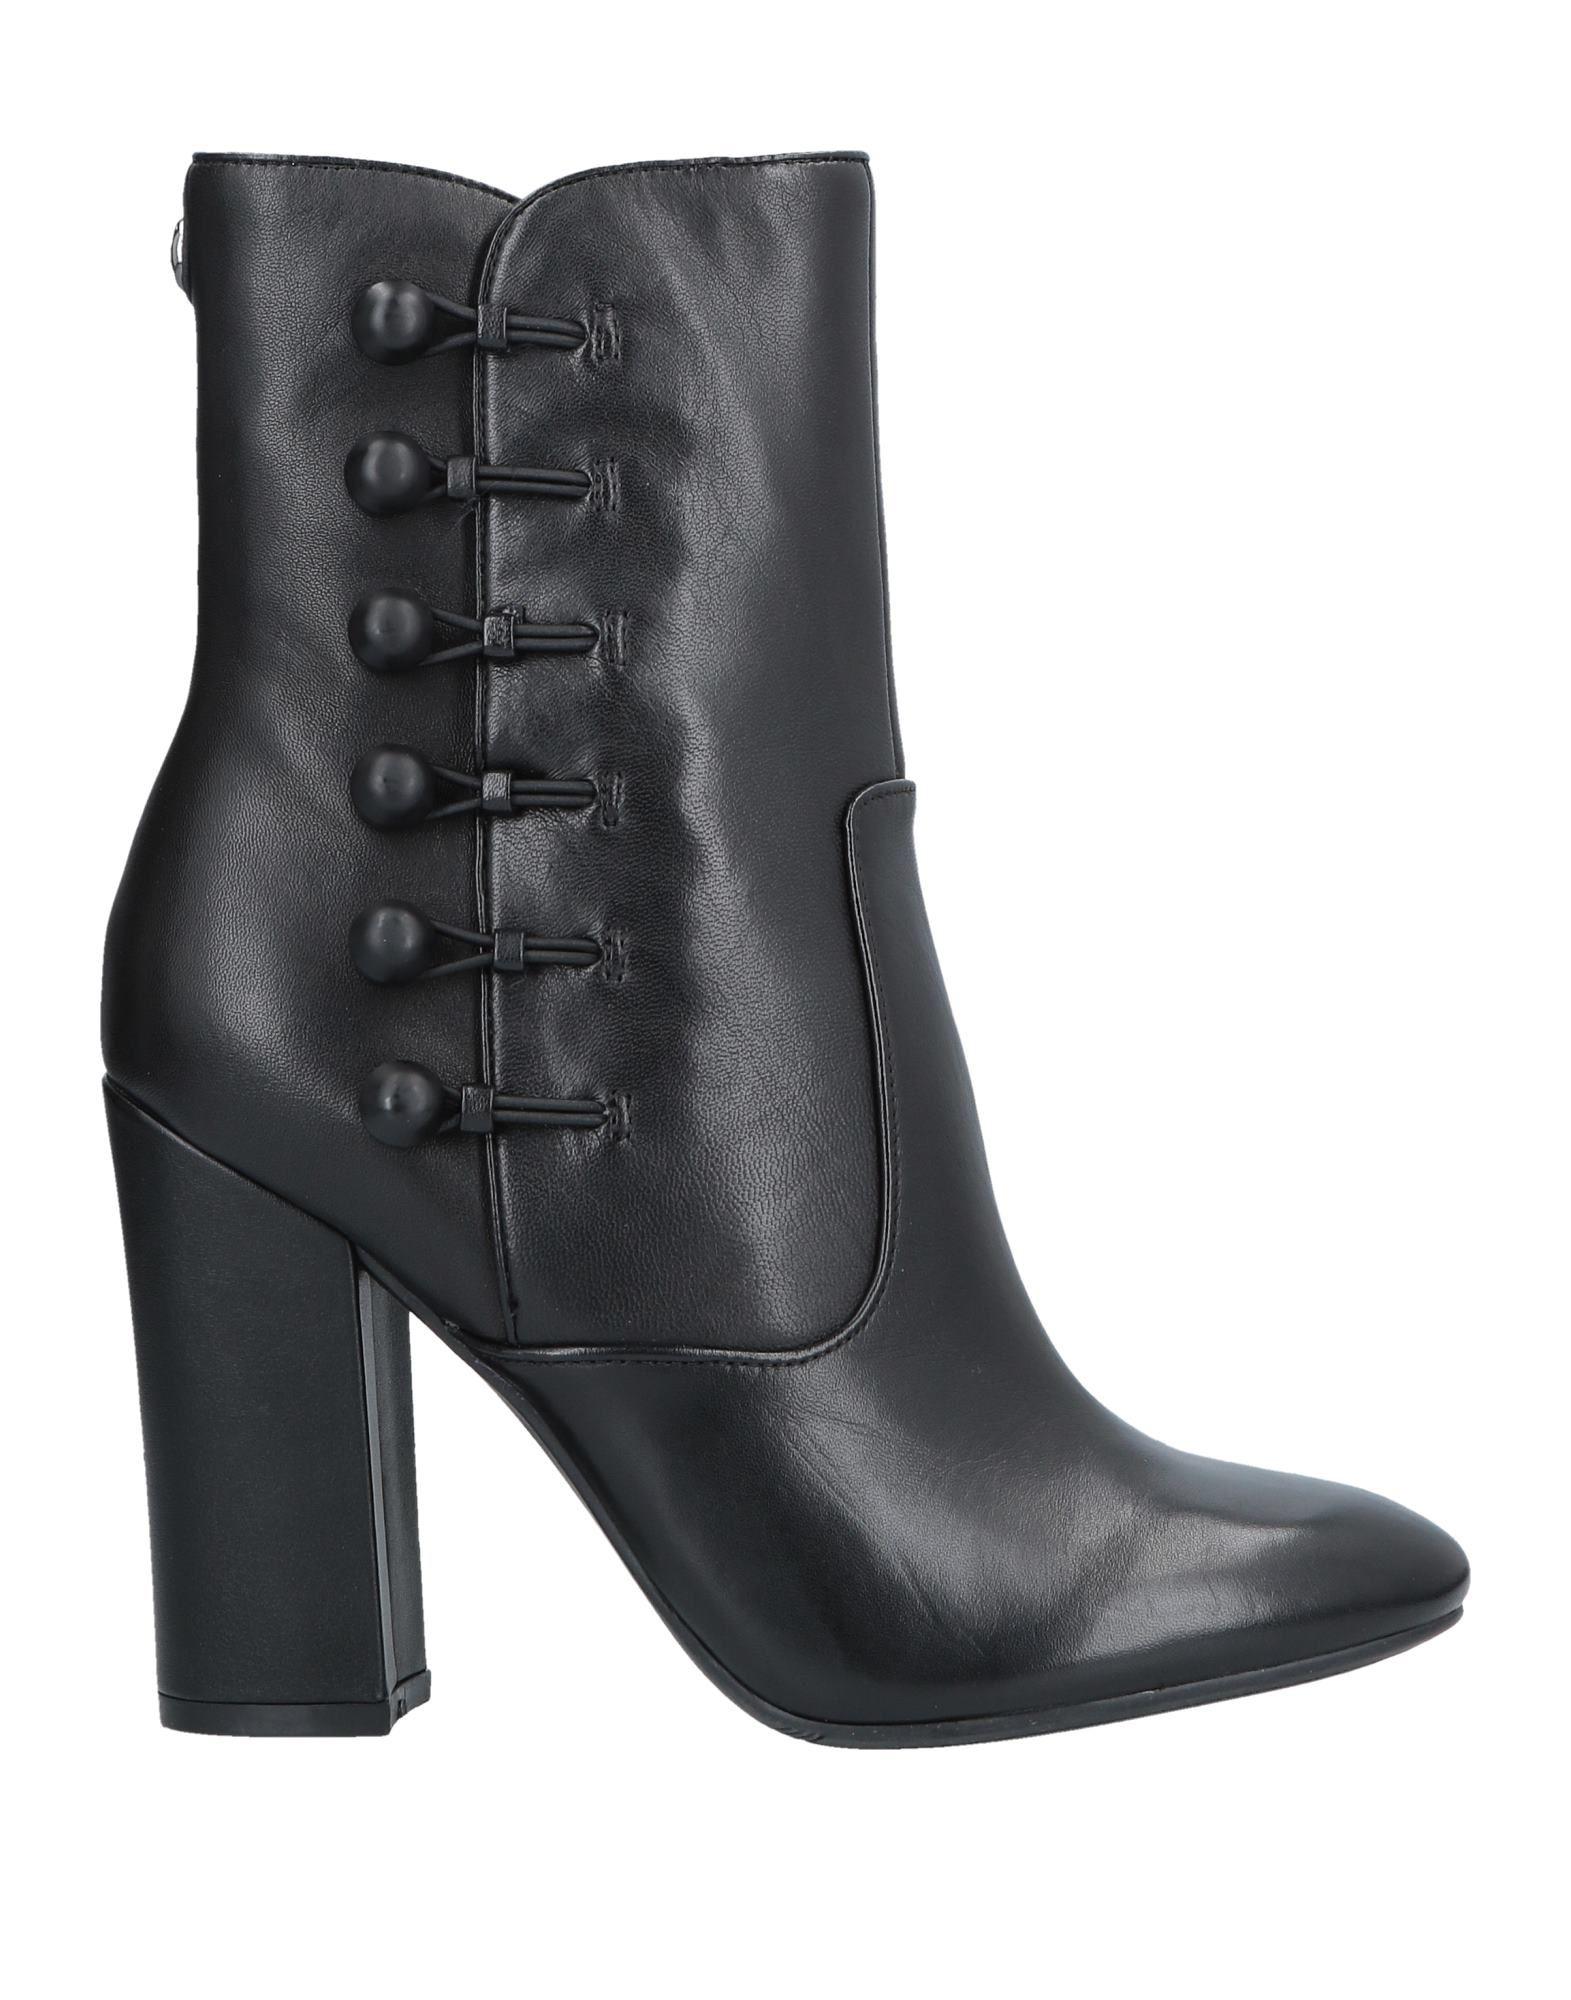 Guess Leather Ankle Boots in Black - Lyst